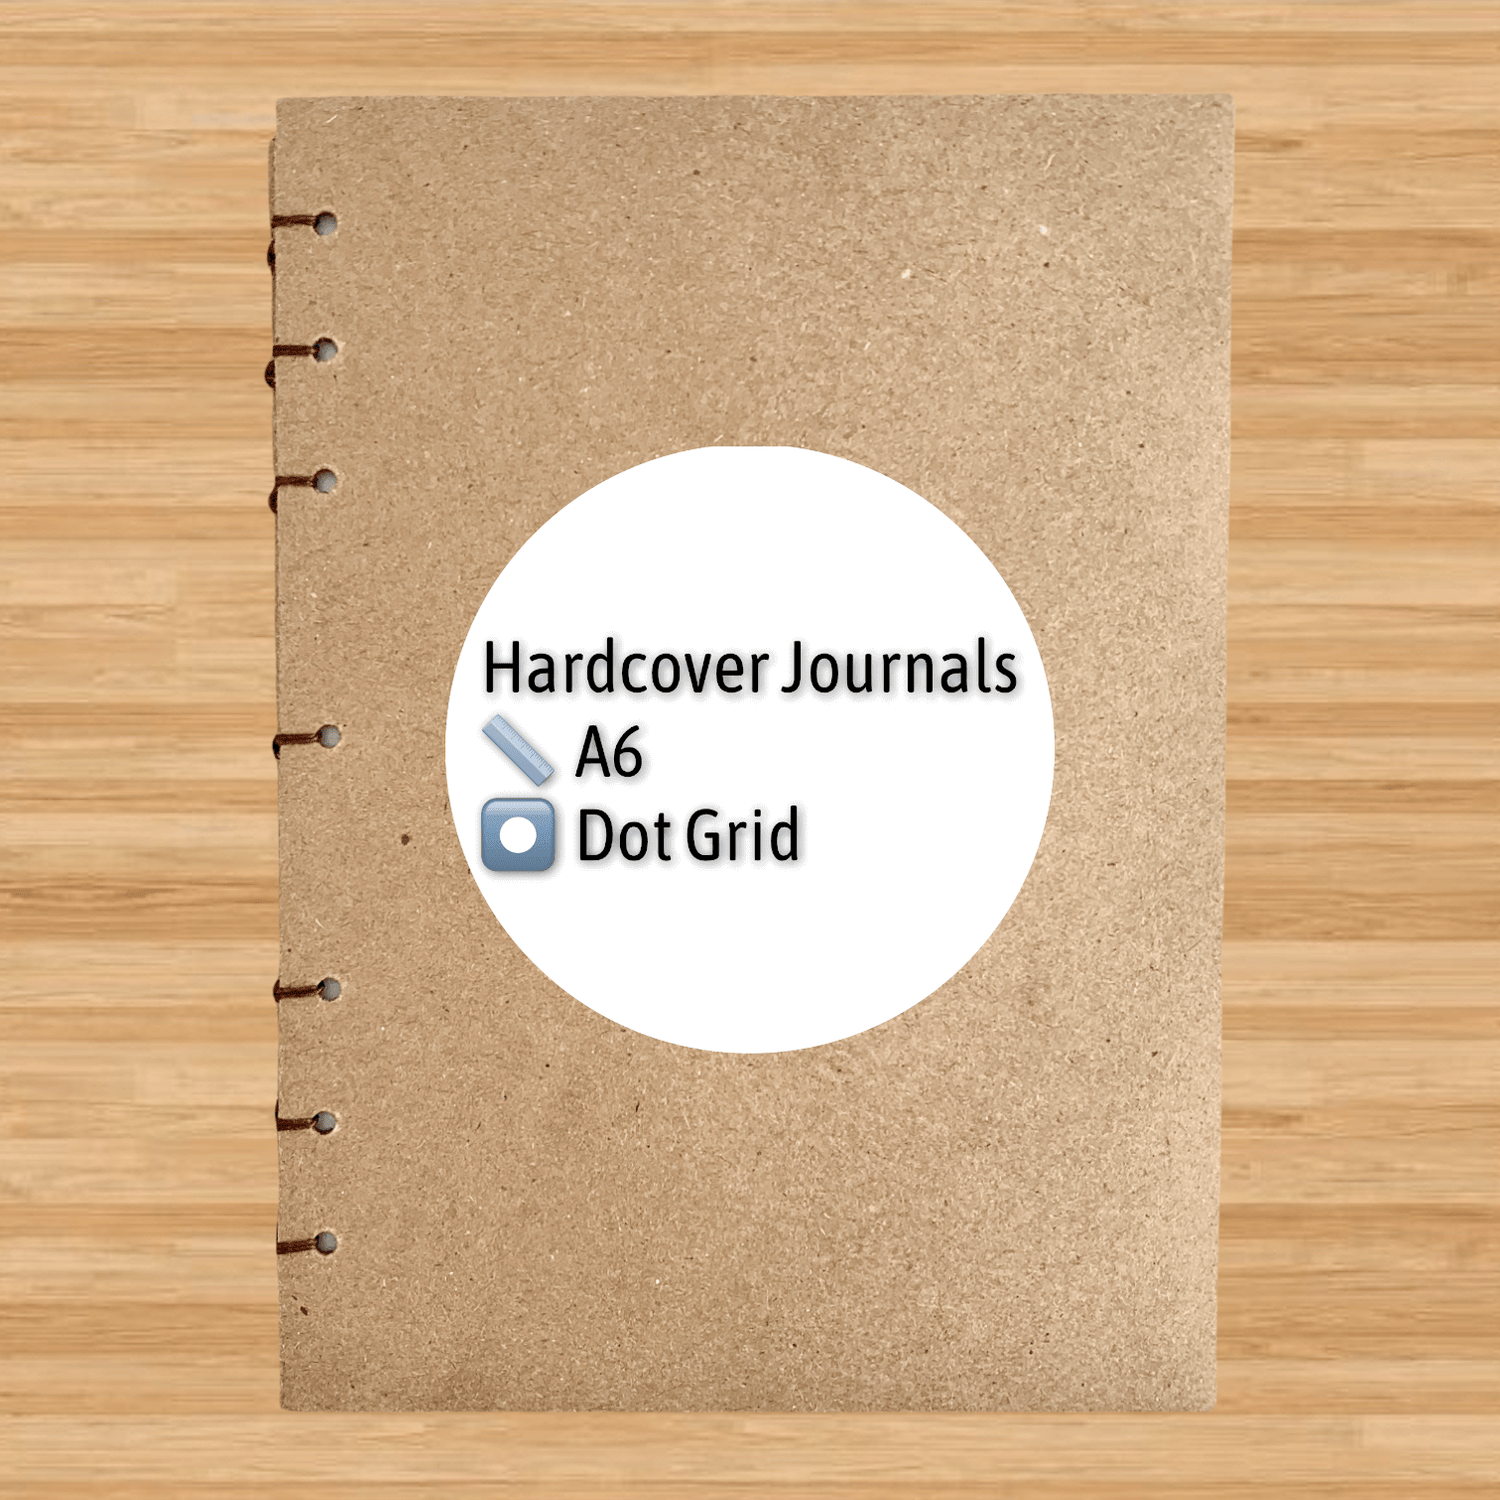 A6 - Hardcover - Hand-Stitched - Dot Grid Journals